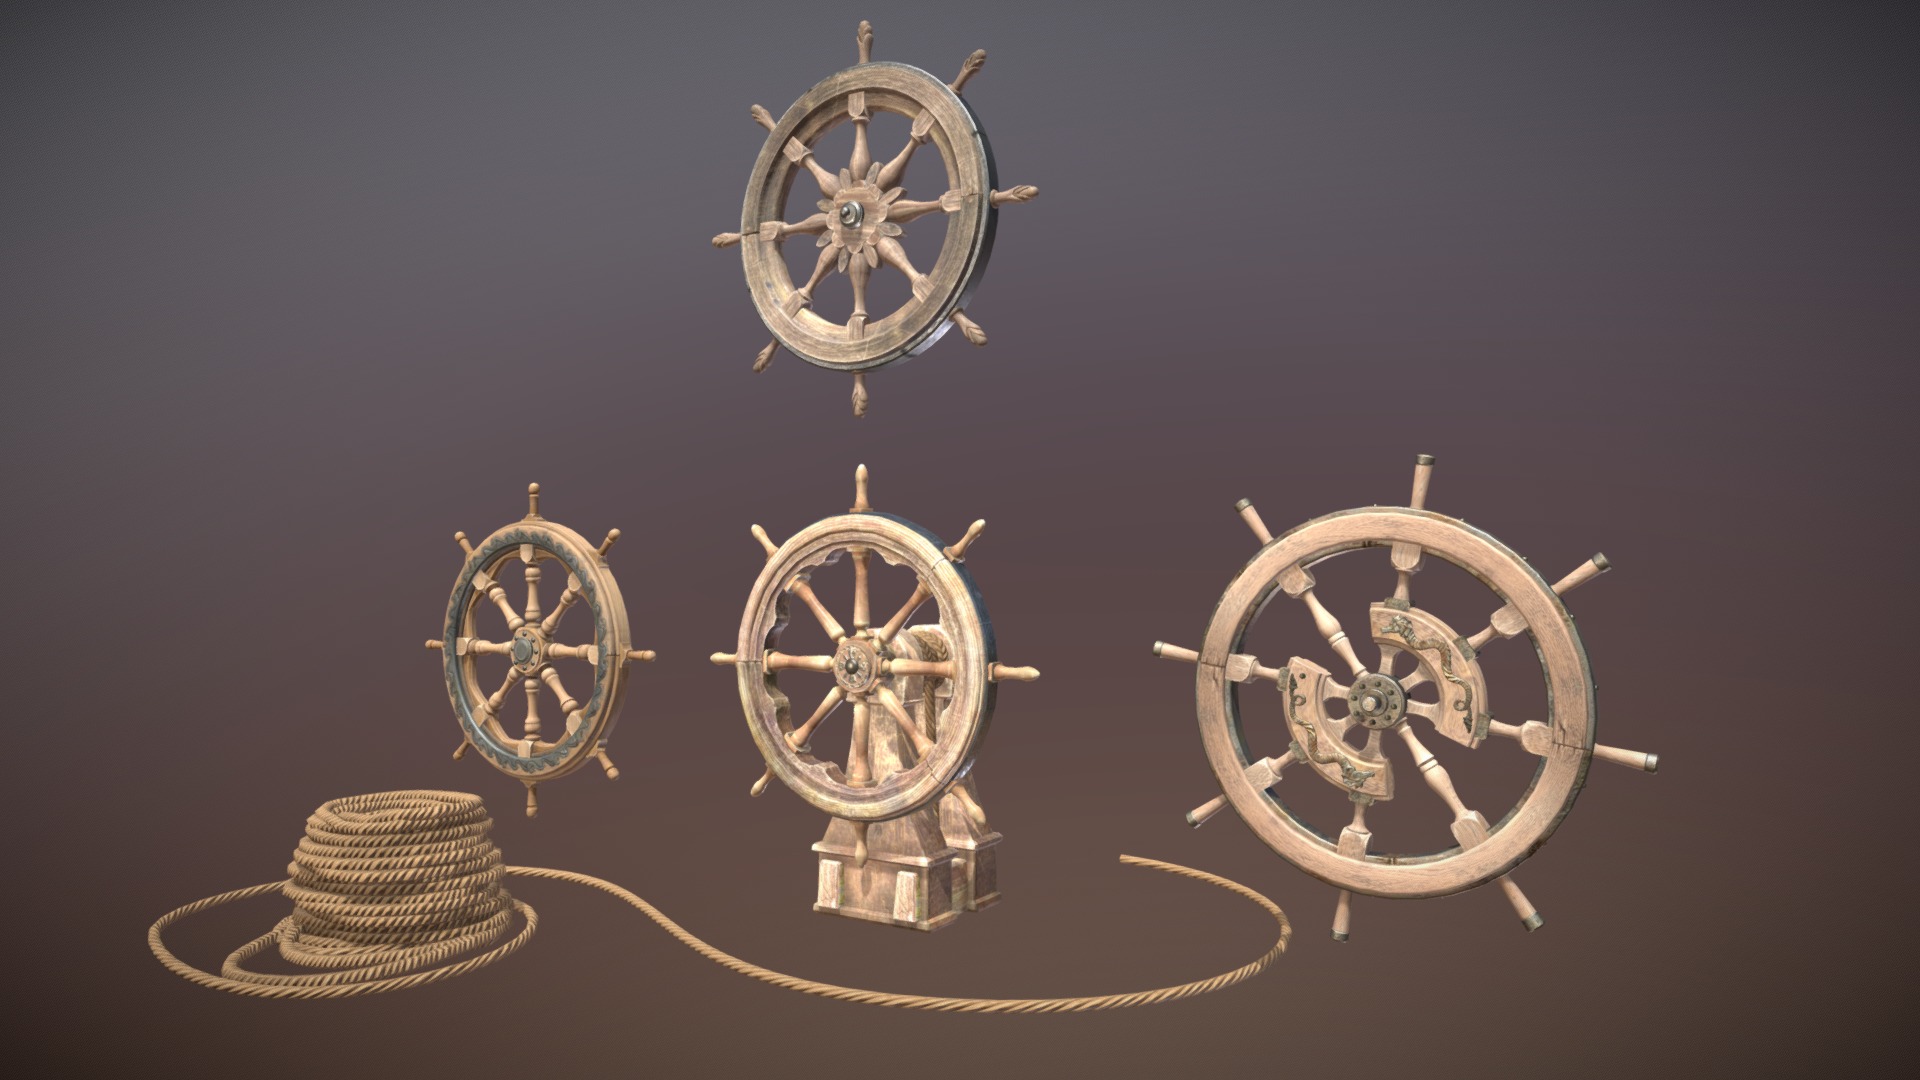 3D model Old ship steering wheels - This is a 3D model of the Old ship steering wheels. The 3D model is about a group of gold and silver gears.